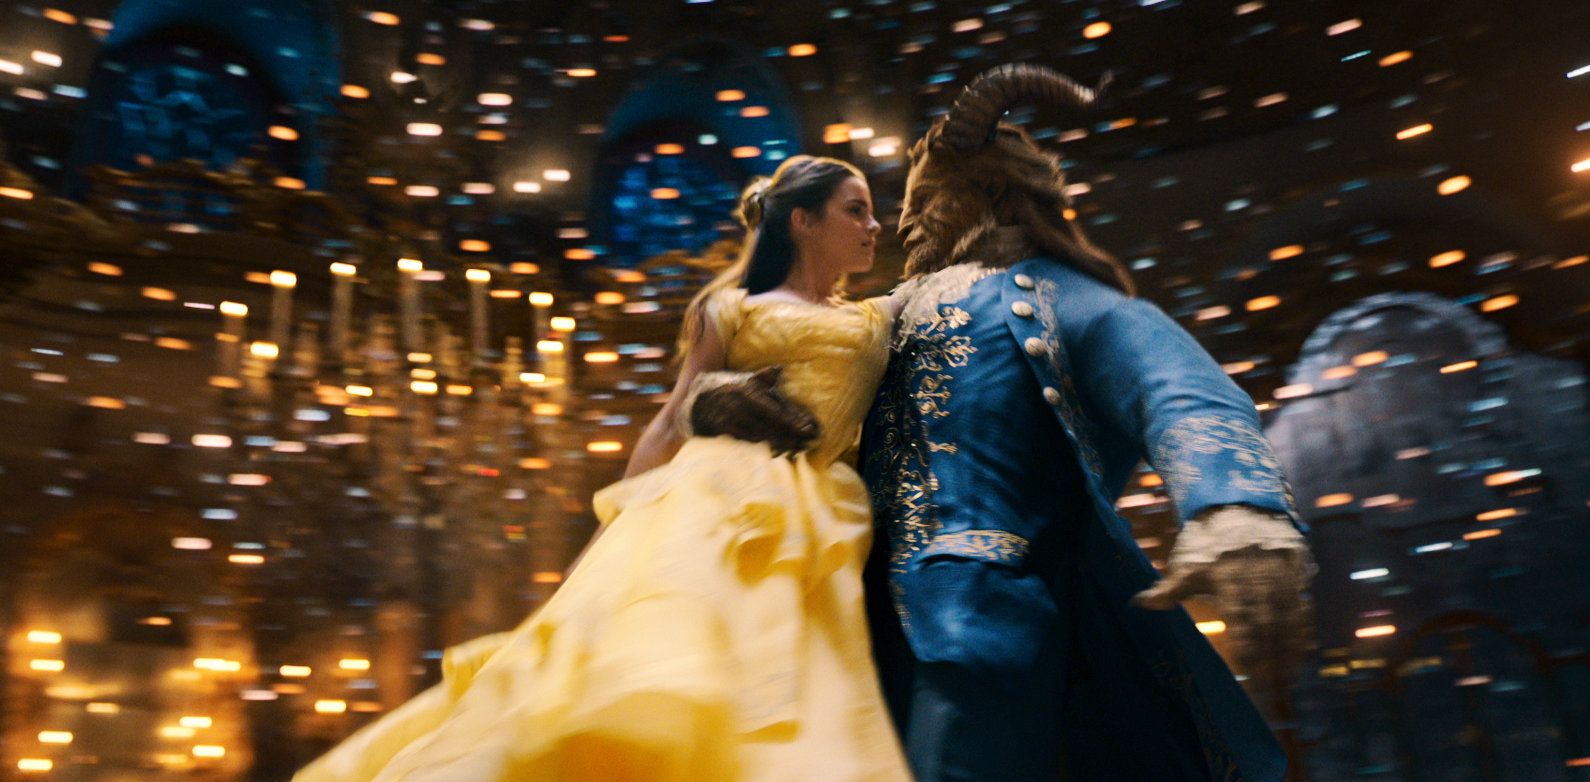 Belle and Beast Dance In The Ballroom